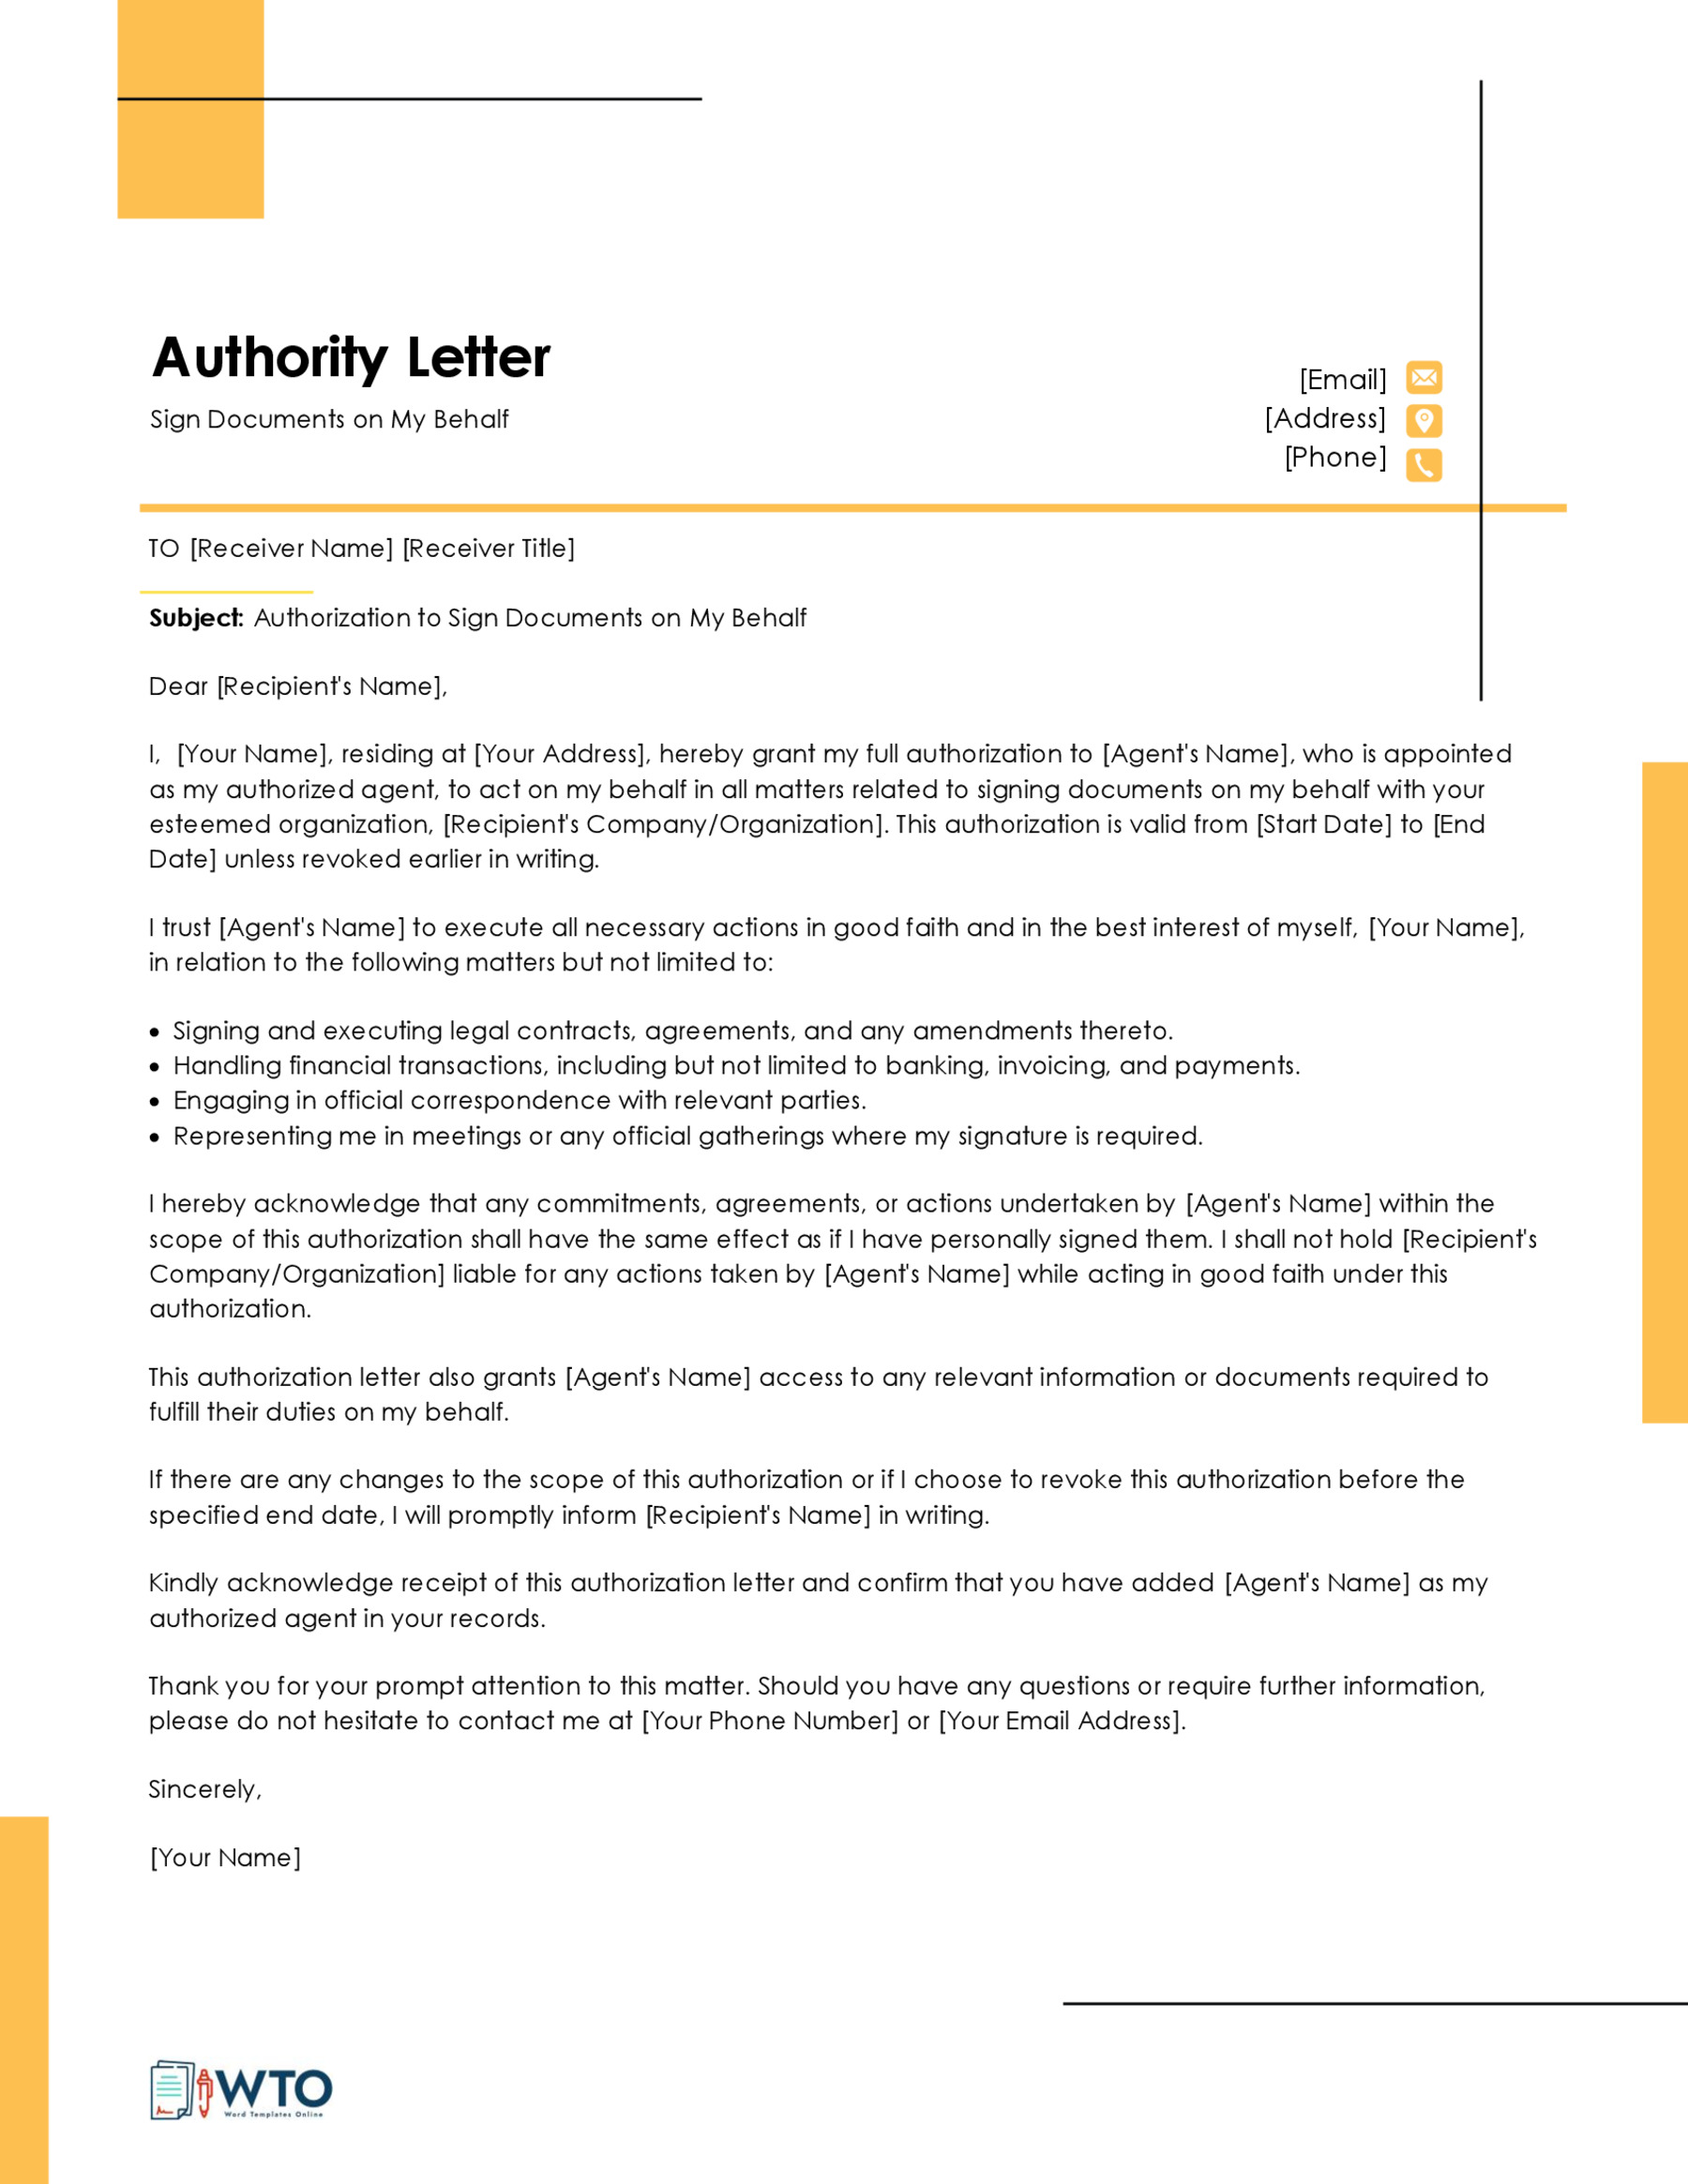 Authorization letter to to Sigh Documents Template-Downloadable word format